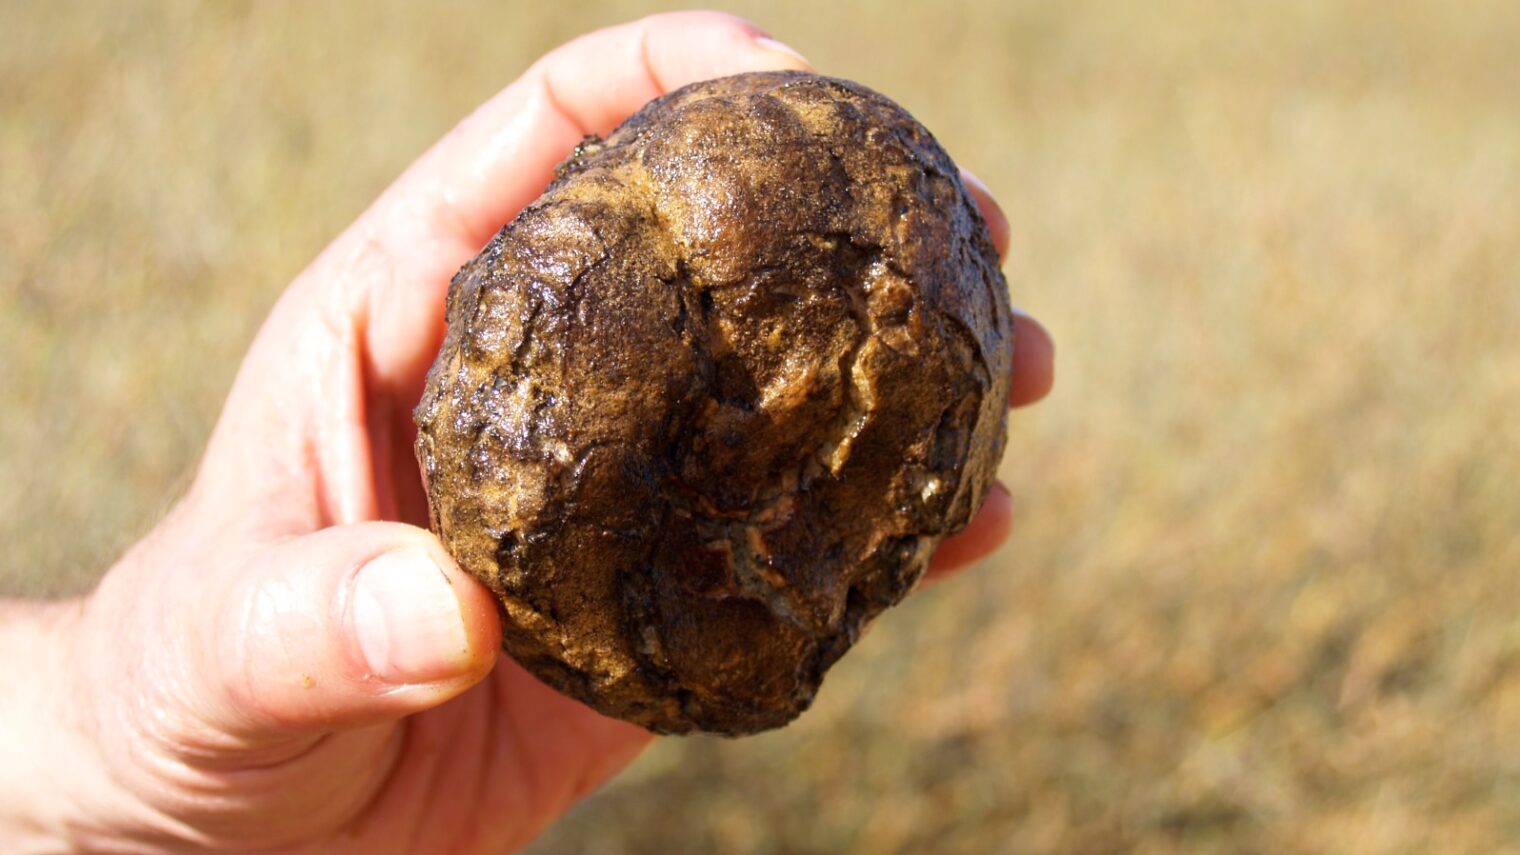 A Negev desert truffle will sell for about one-tenth the price of European forest truffles. Photo courtesy of MOPRN